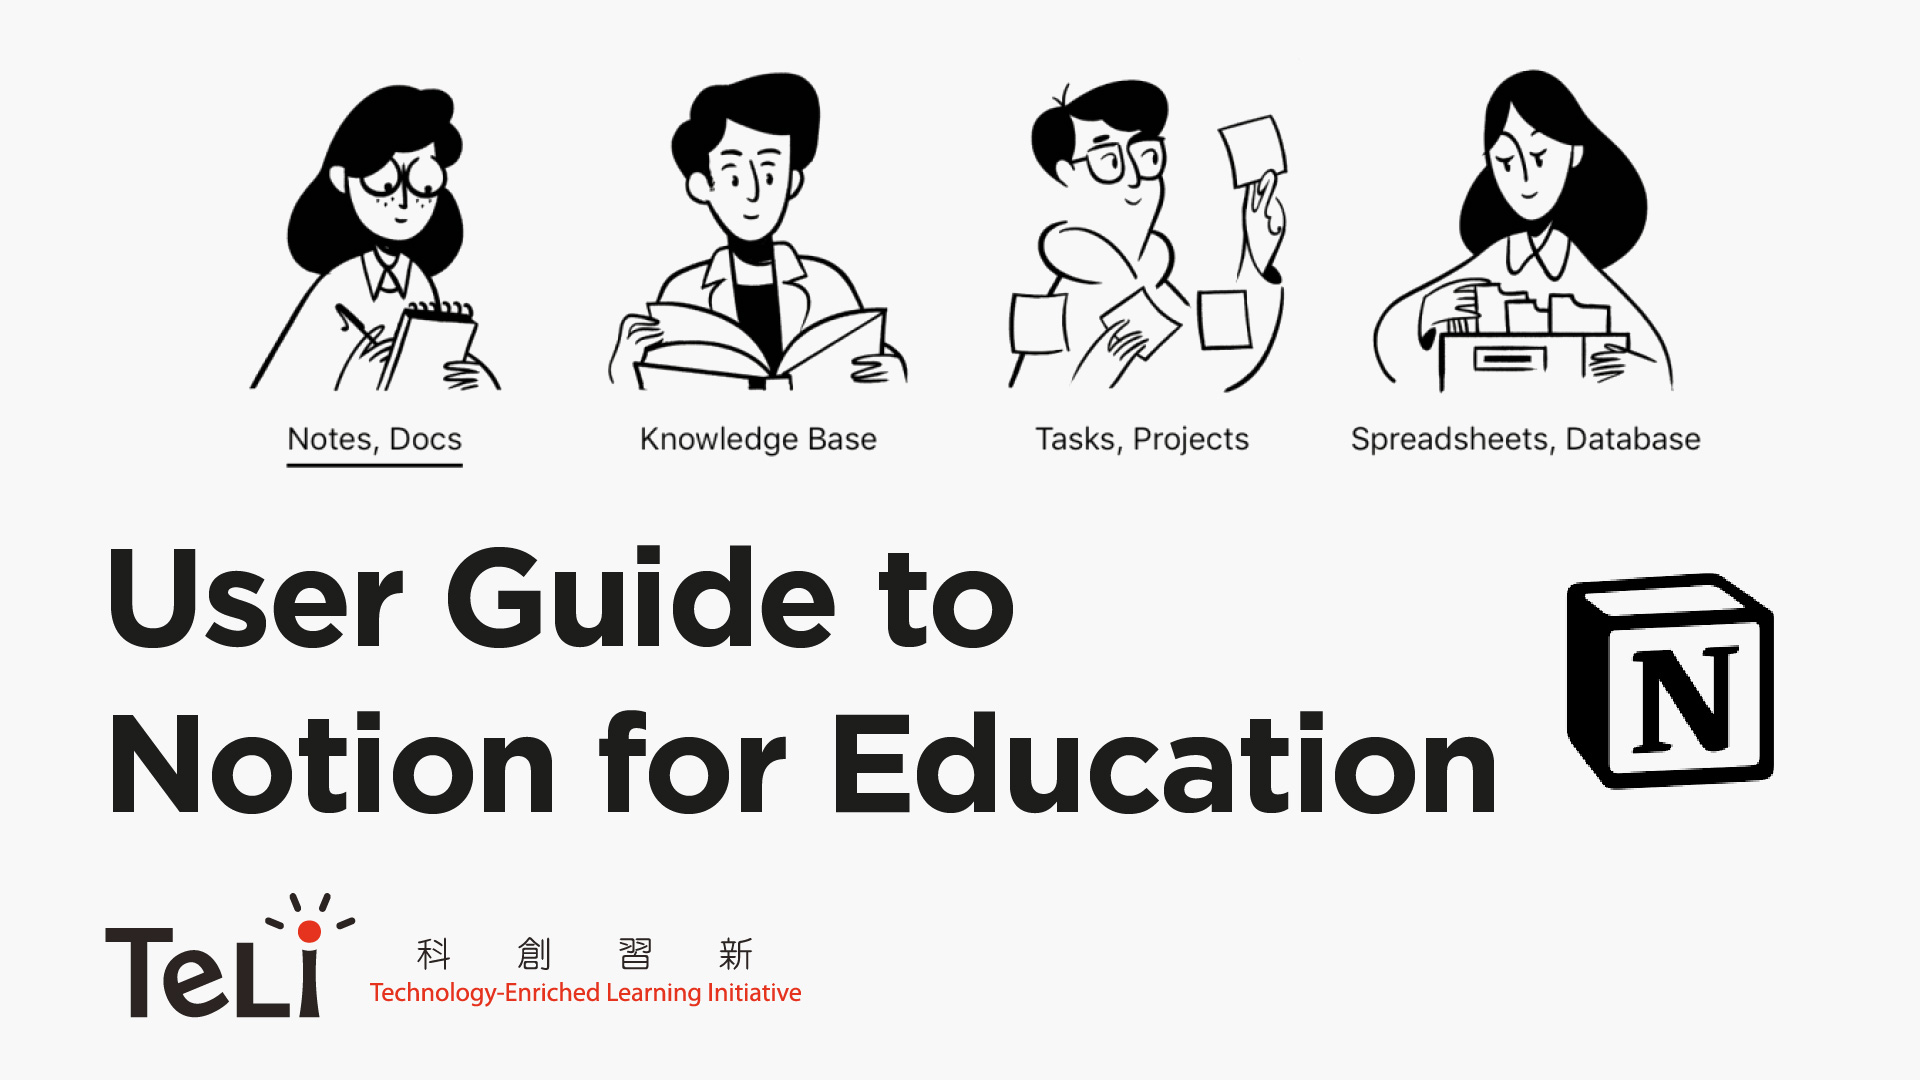 User Guide to Notion for Education